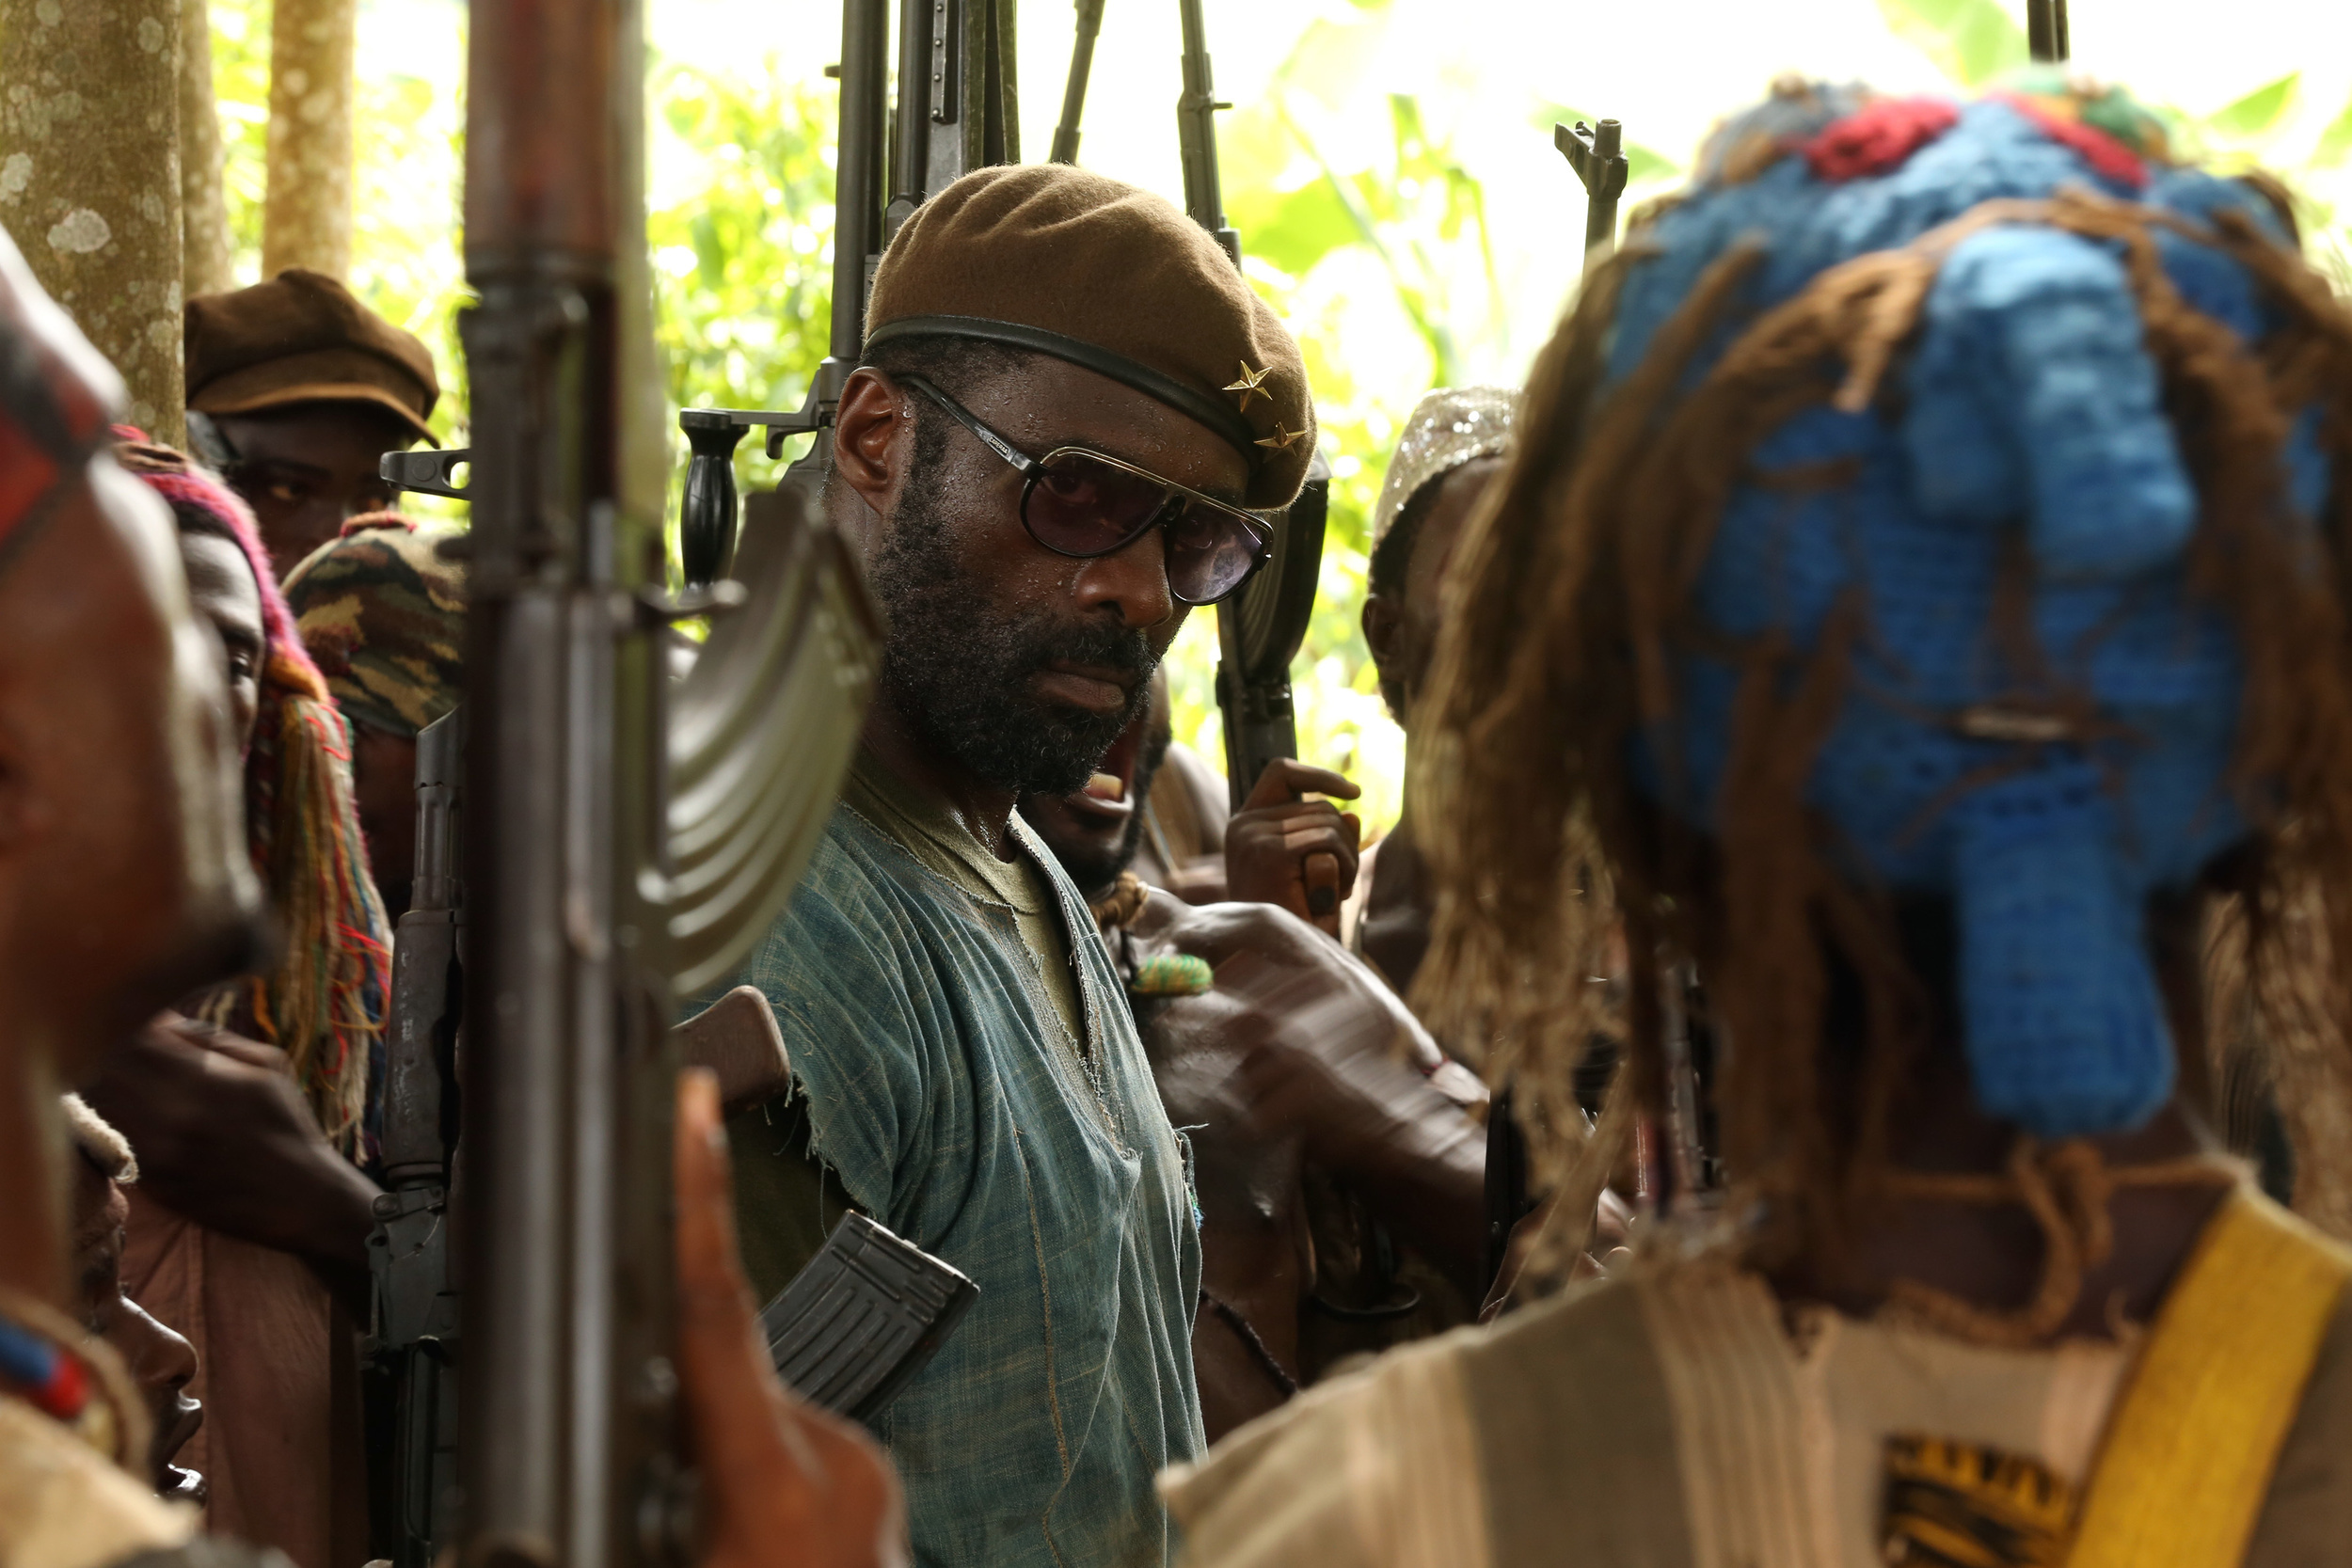 <p><em>Beasts of No Nation</em> was one of Netflix’s first films to garner major attention and remains one of its best to date. It tells the story of Agu, who is forced to become a child soldier in an African civil war after his village and family are massacred. <em>Beasts of No Nation</em> offers an uncompromising and shocking look at the brutality of war, especially when children are forced to become cold-blooded killers. Youngster Abraham Attah shines alongside co-star Idris Elba.</p><p><a href='https://www.msn.com/en-us/community/channel/vid-cj9pqbr0vn9in2b6ddcd8sfgpfq6x6utp44fssrv6mc2gtybw0us'>Follow us on MSN to see more of our exclusive entertainment content.</a></p>